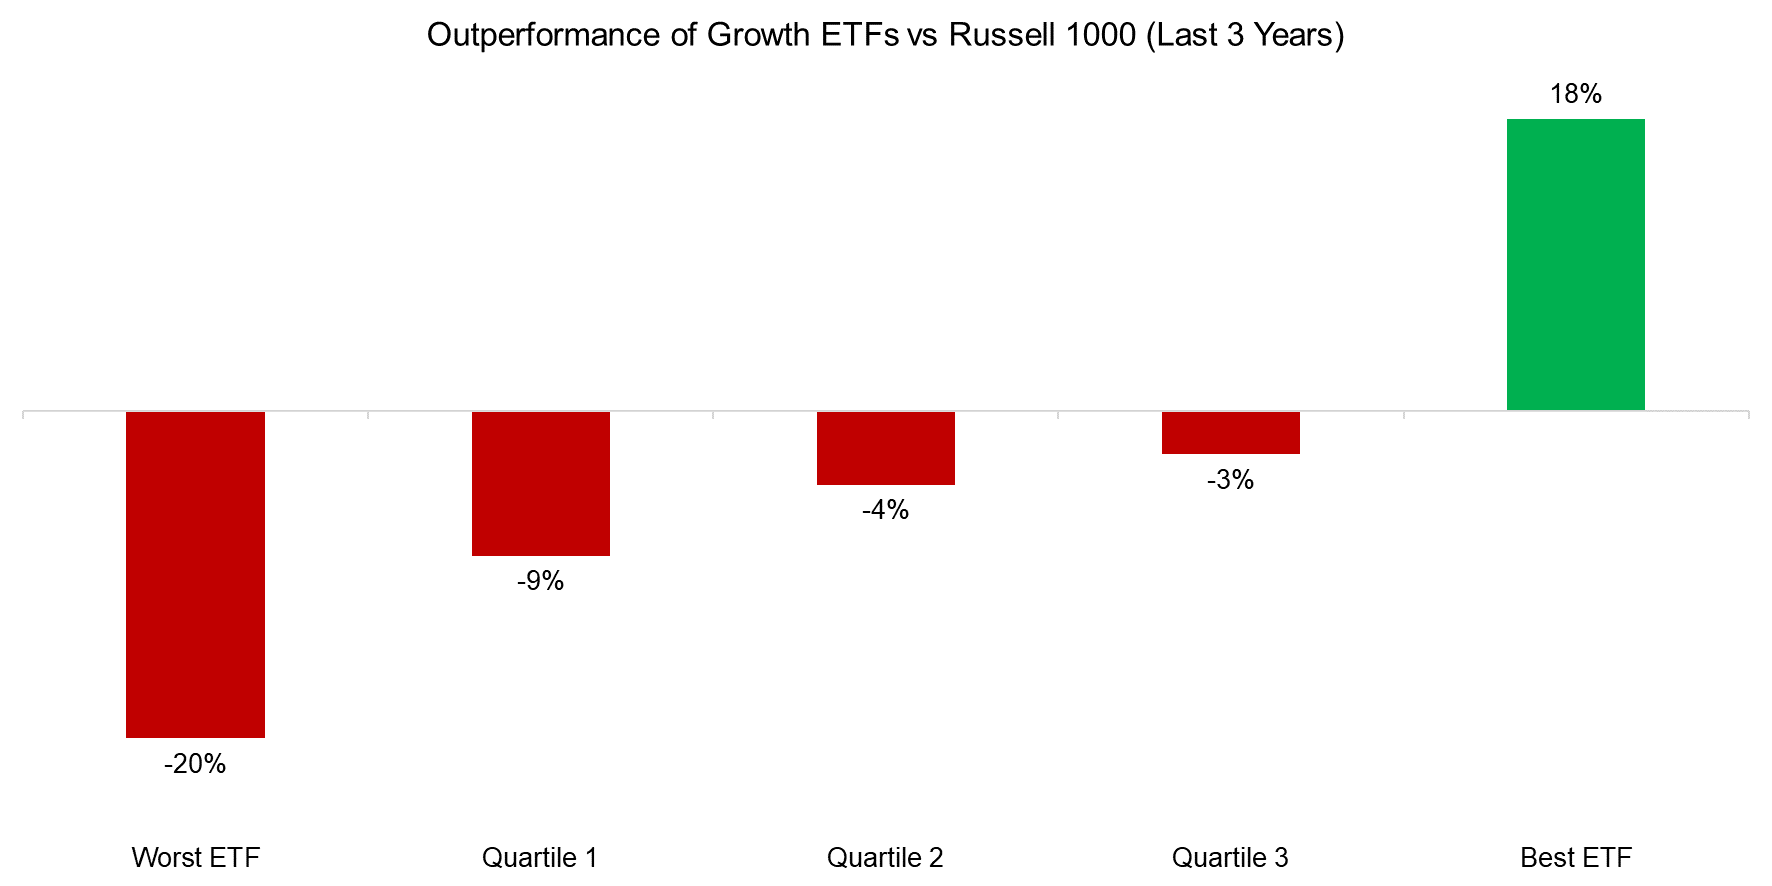 https://wps.factorresearch.com/wp-content/uploads/2023/01/Outperformance-of-Growth-ETFs-vs-Russell-1000-Last-3-Years.png